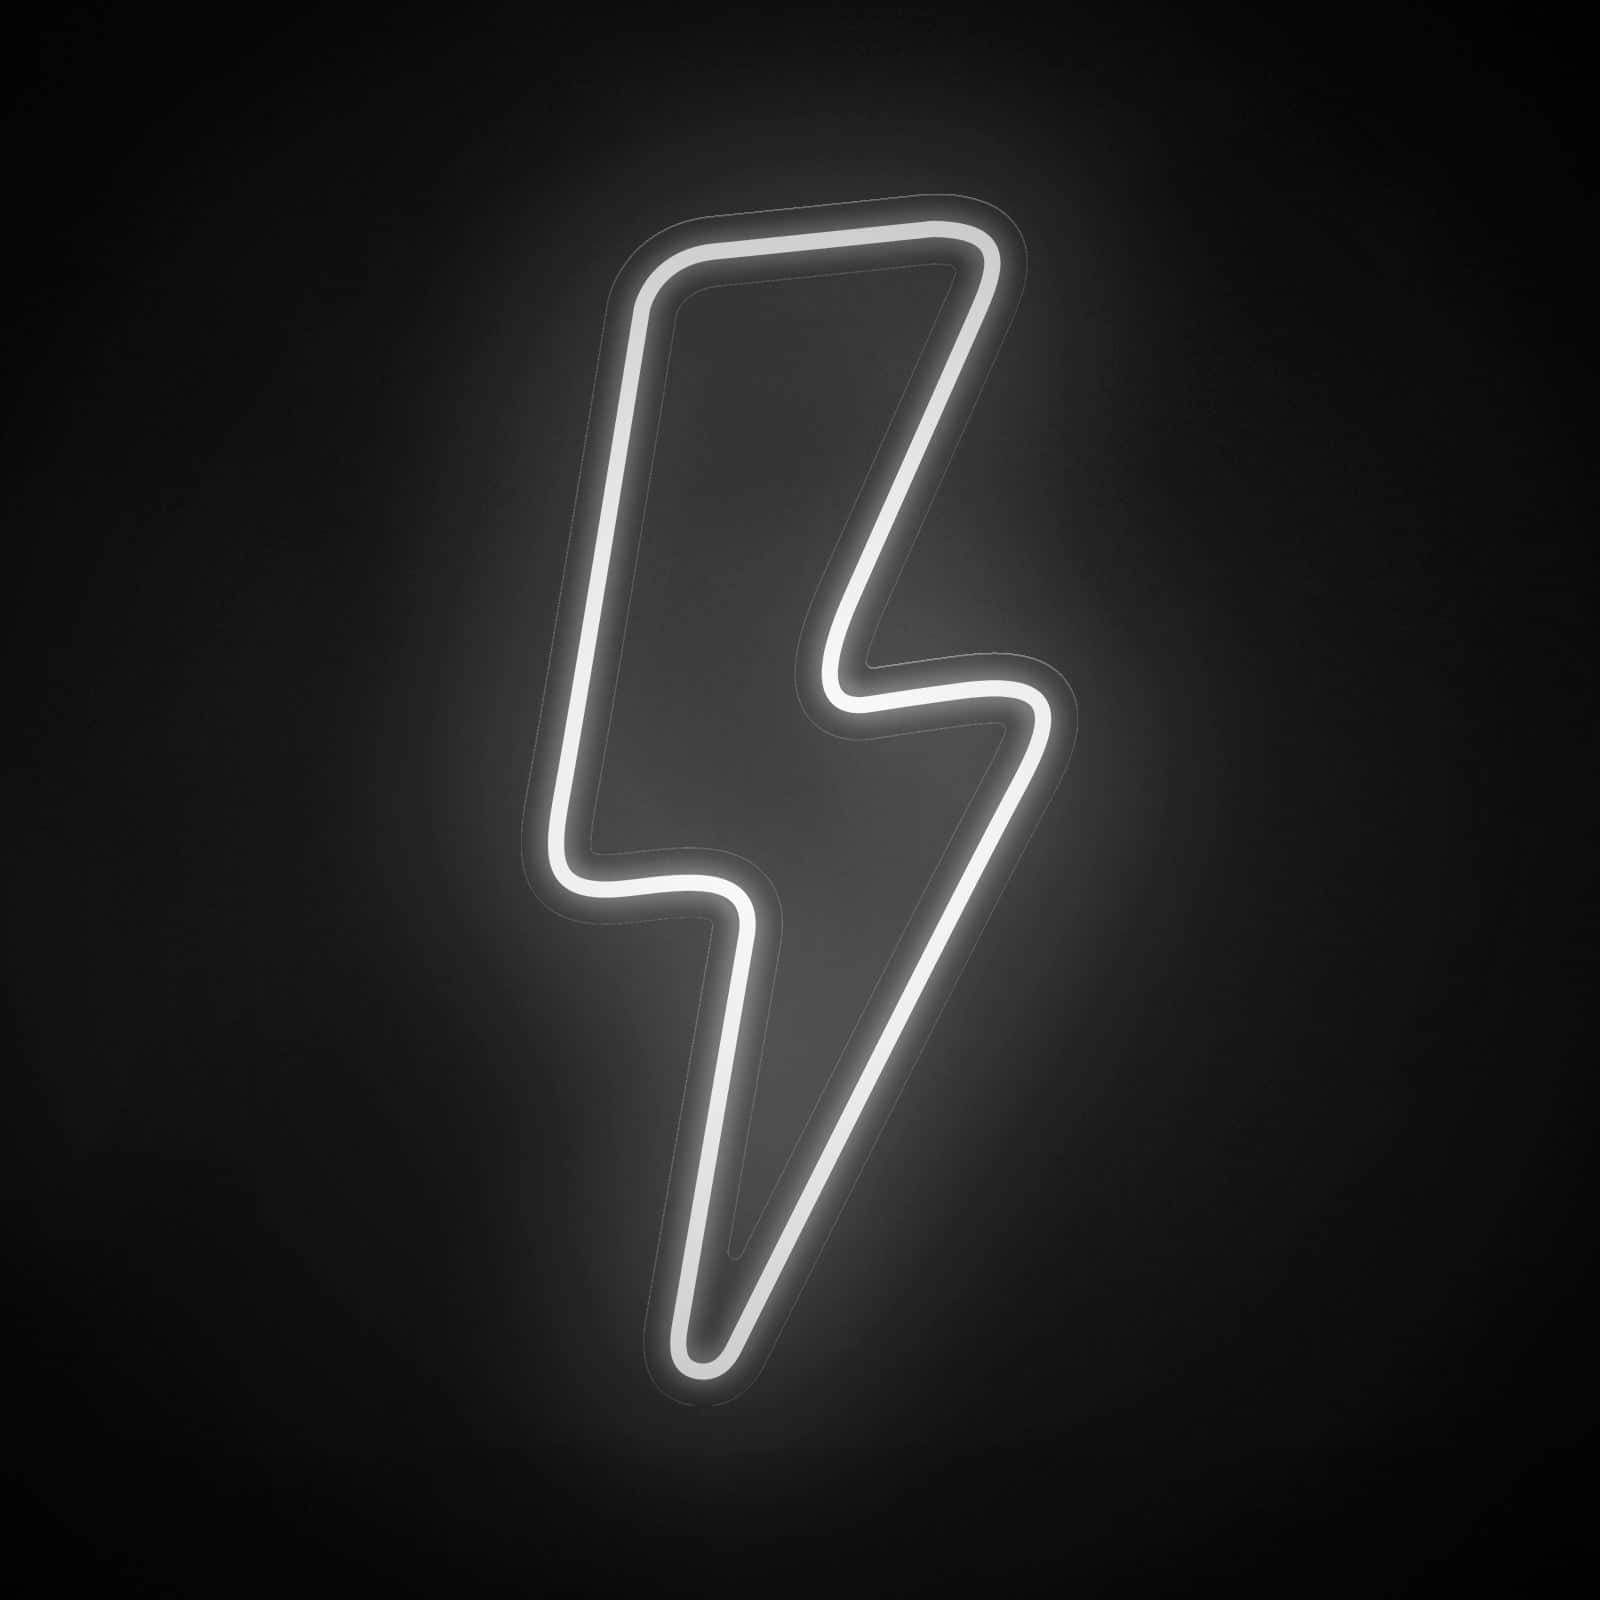 Power from the skies strikes your Lightning Bolt Iphone. Wallpaper